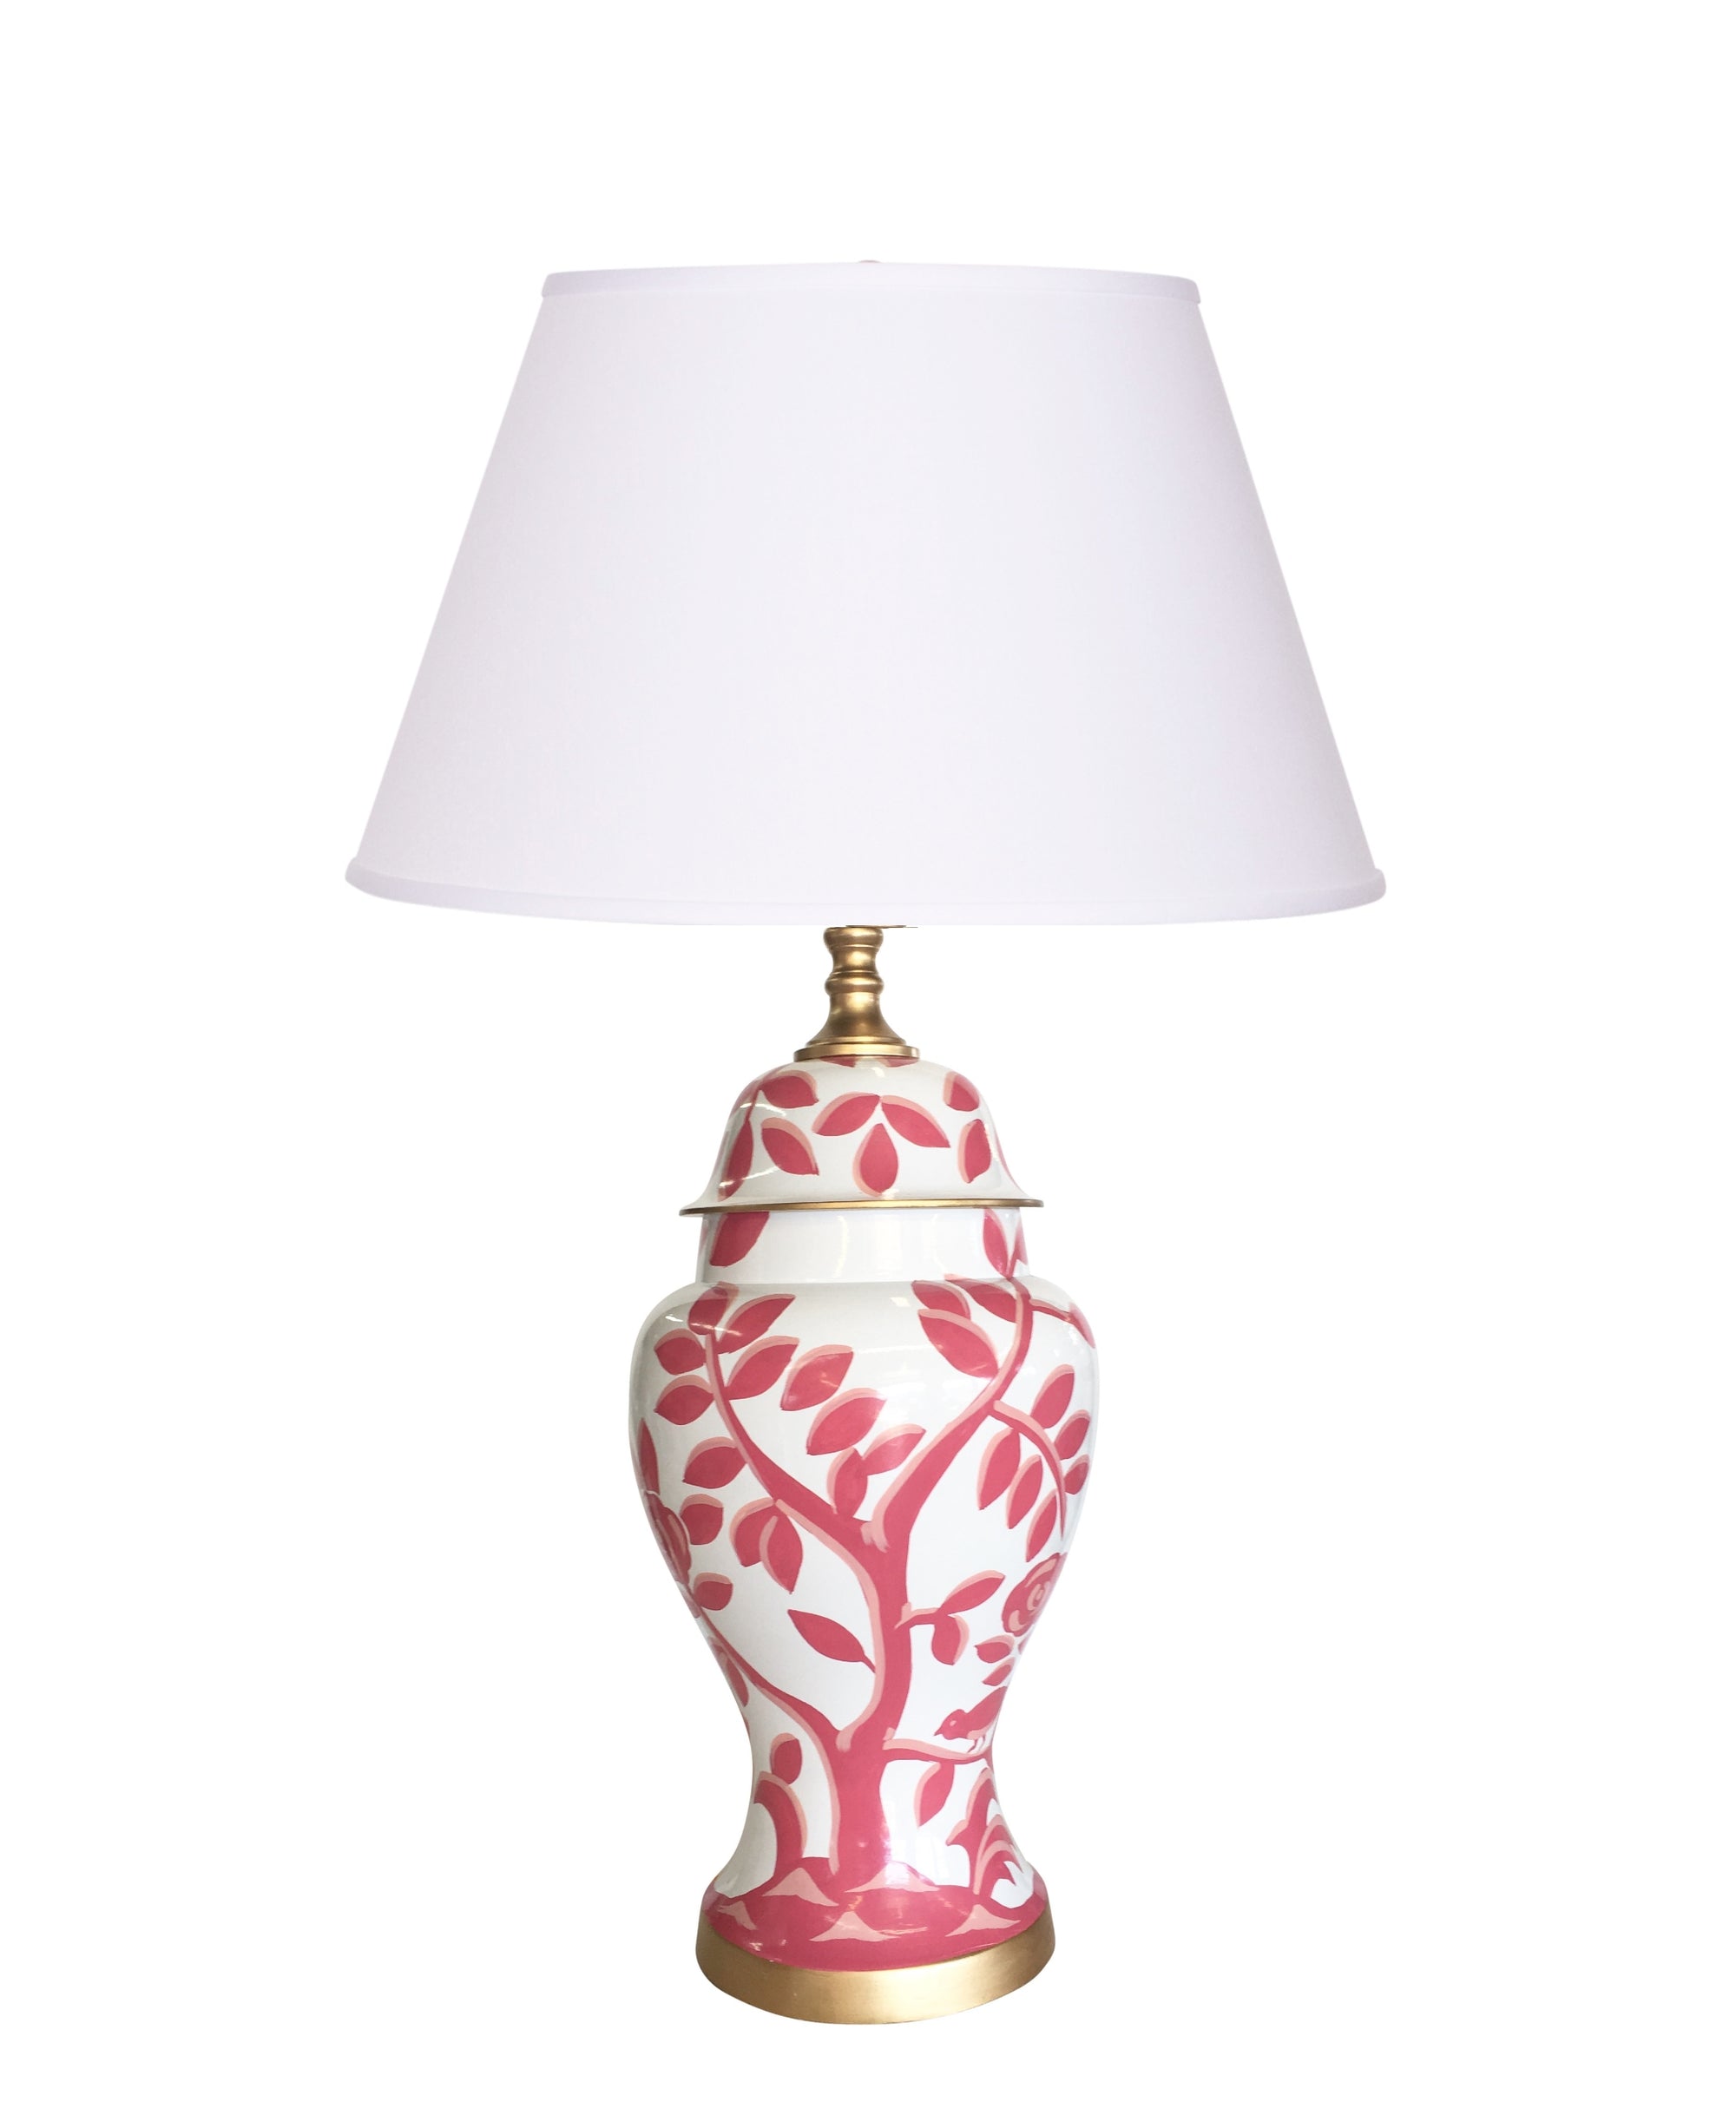 Dana Gibson Cliveden in Pink Lamp